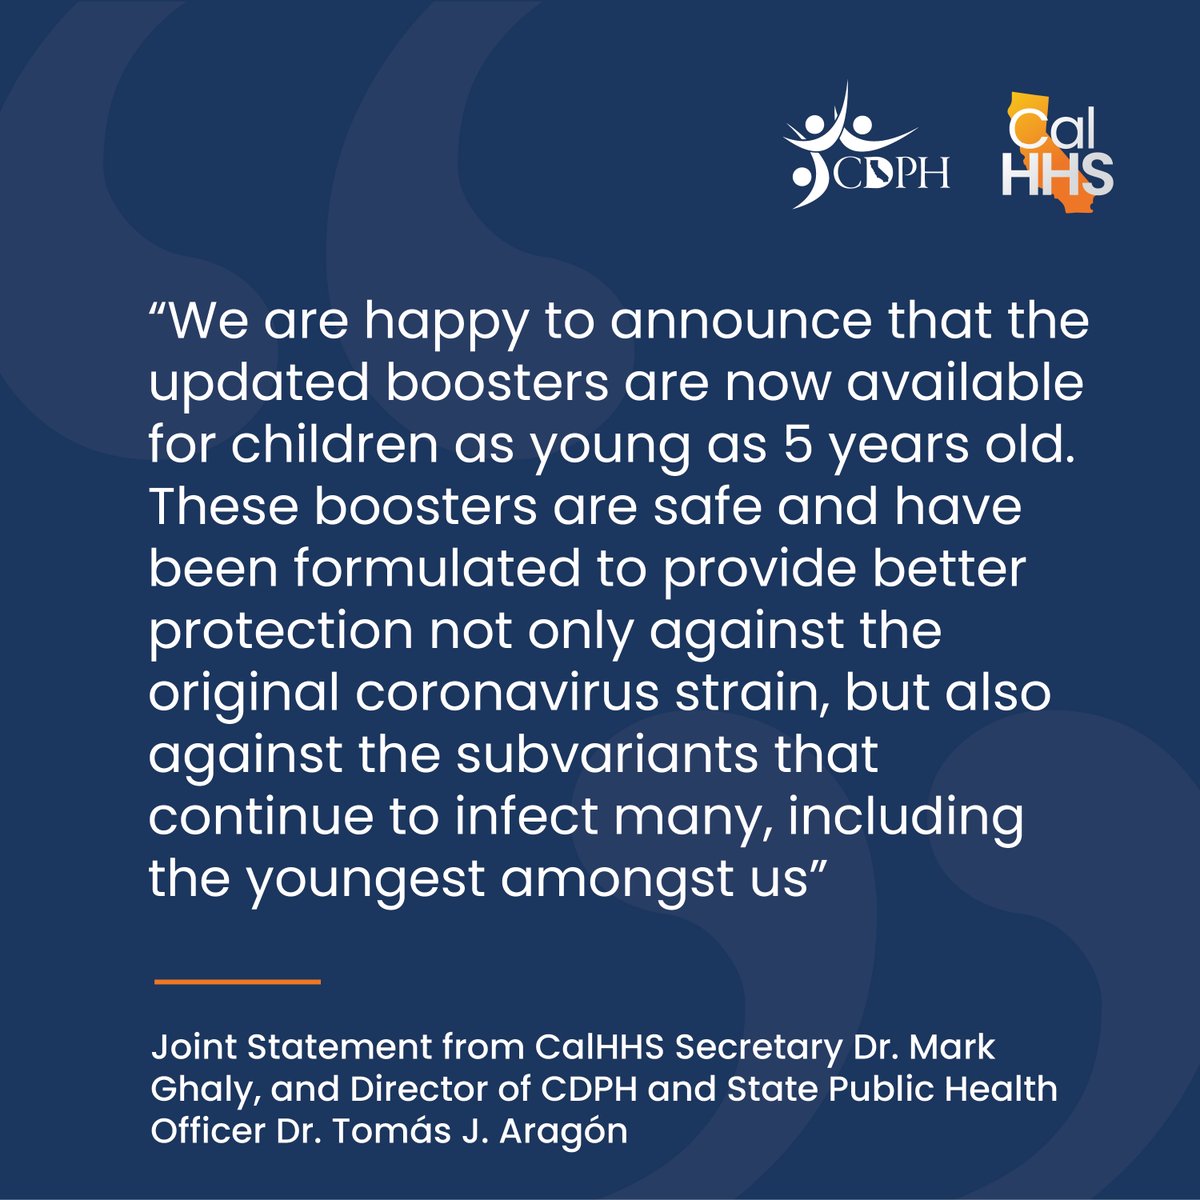 Eligibility for the updated COVID-19 boosters now extends to individuals 5 years of age & older. Joint statement from CalHHS Secretary Dr. Mark Ghaly and @CAPublicHealth Director & State Public Health Officer Dr. Tomás J. Aragón: cdph.ca.gov/Programs/OPA/P…